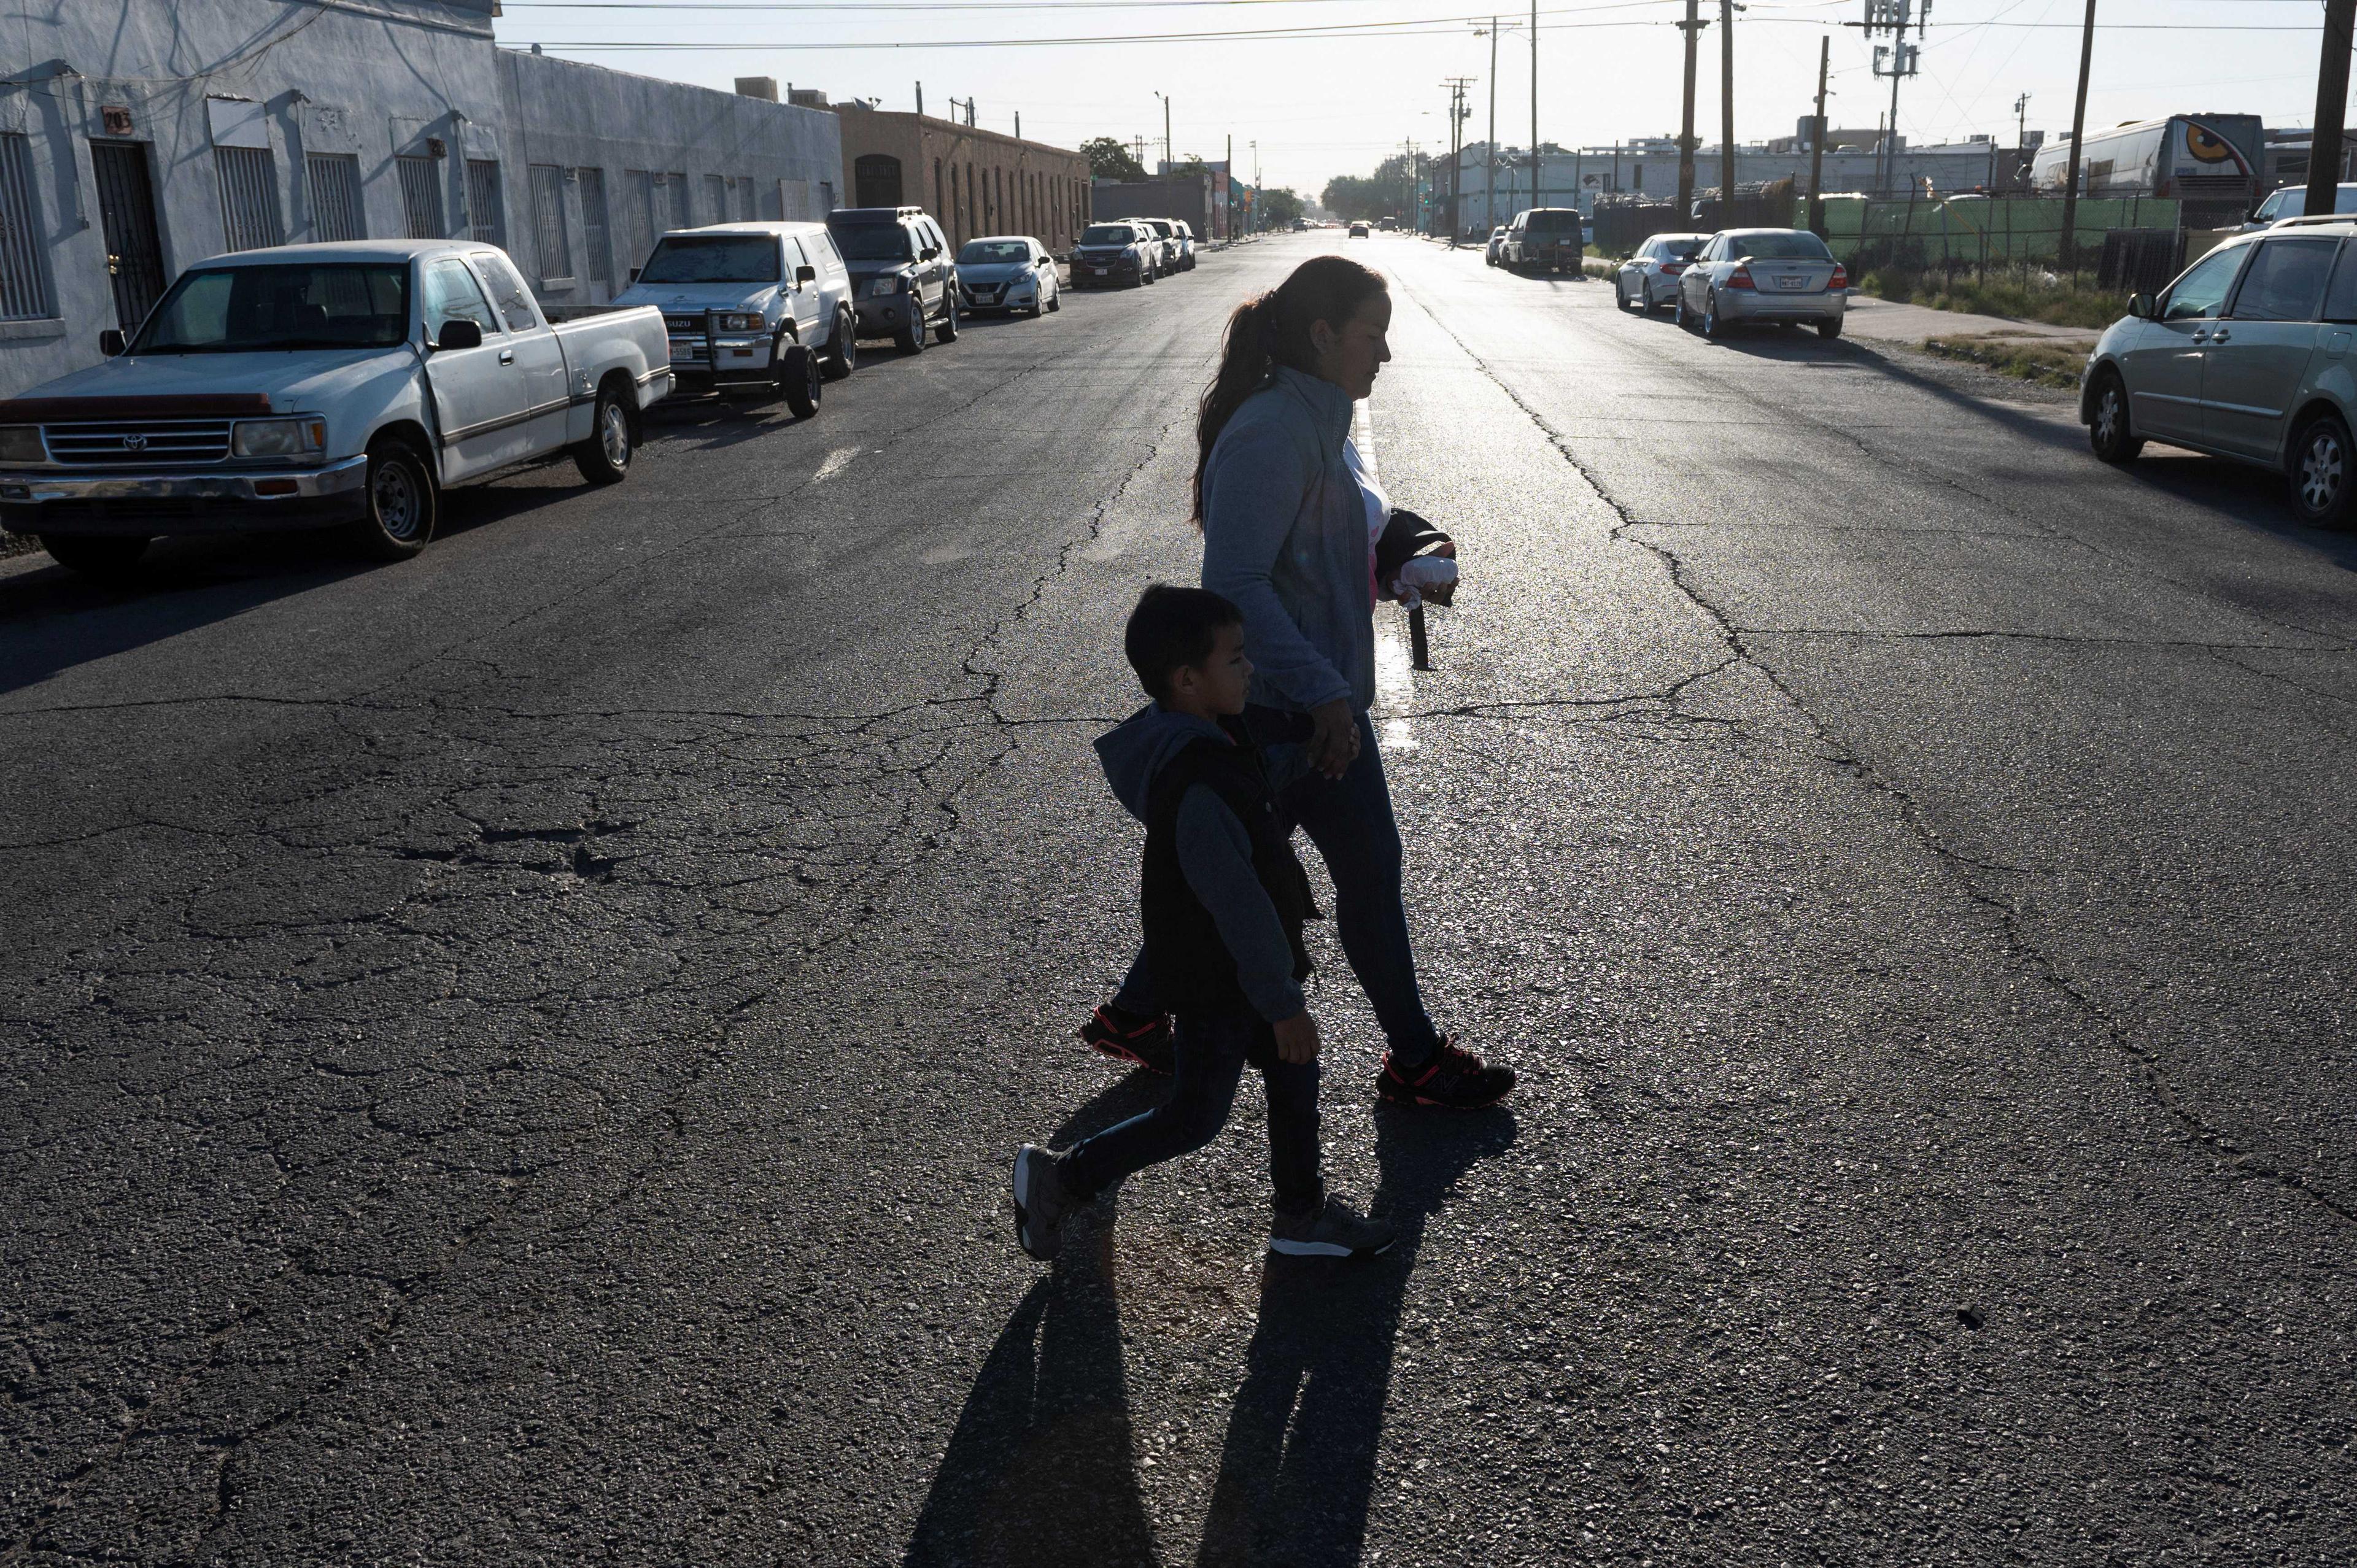 A mother and son walk to the entrance of a US Border Patrol office, to surrender to US Immigration officers and get their claim to enter the US, near El Paso, Texas, US, May 10. Photo: Reuters